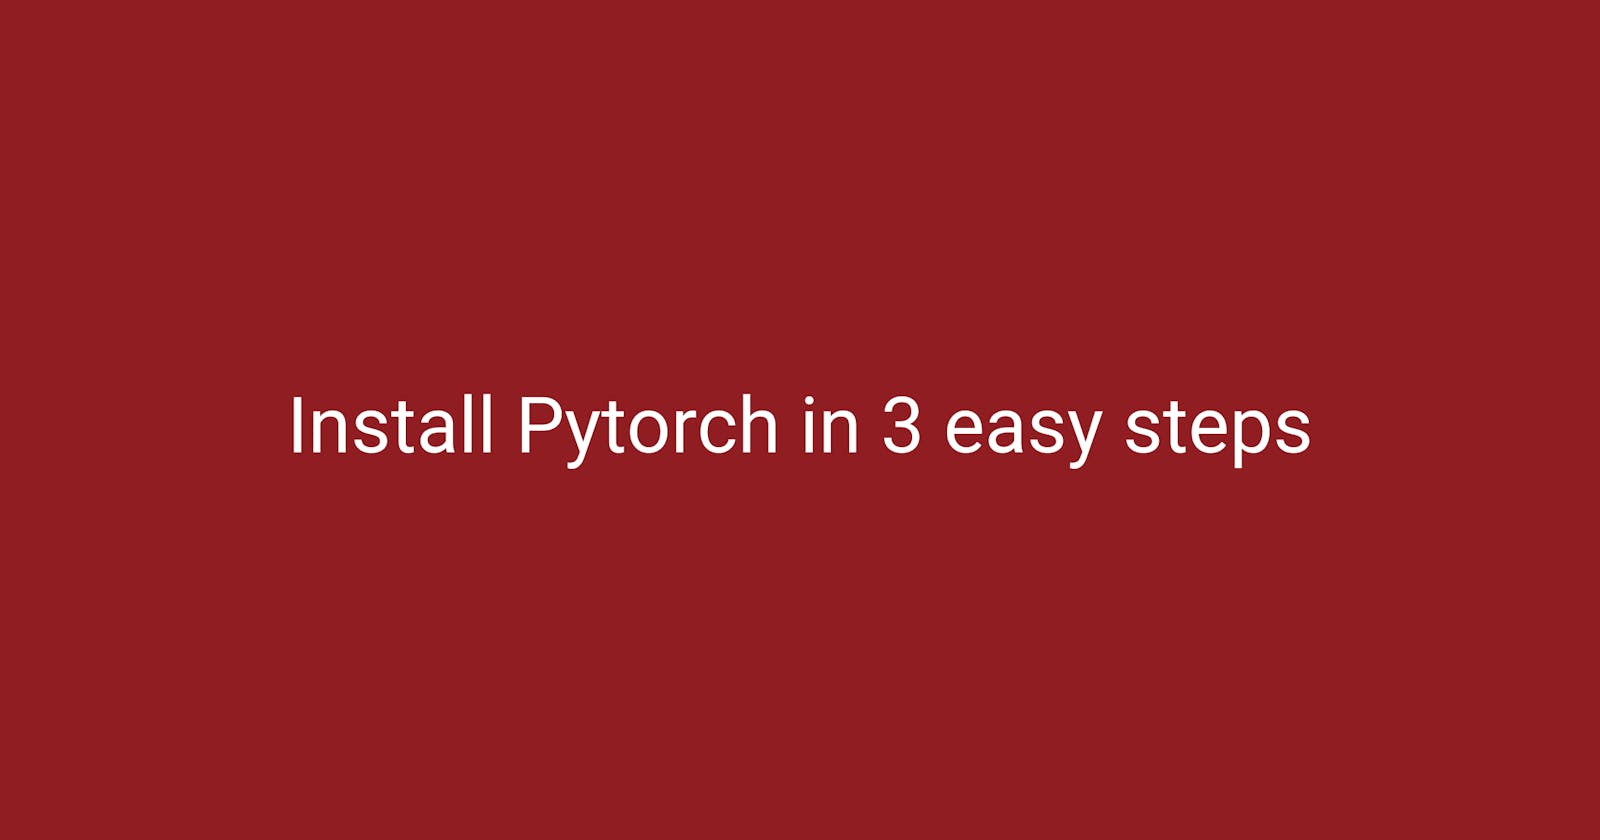 How to Install Pytorch using Conda